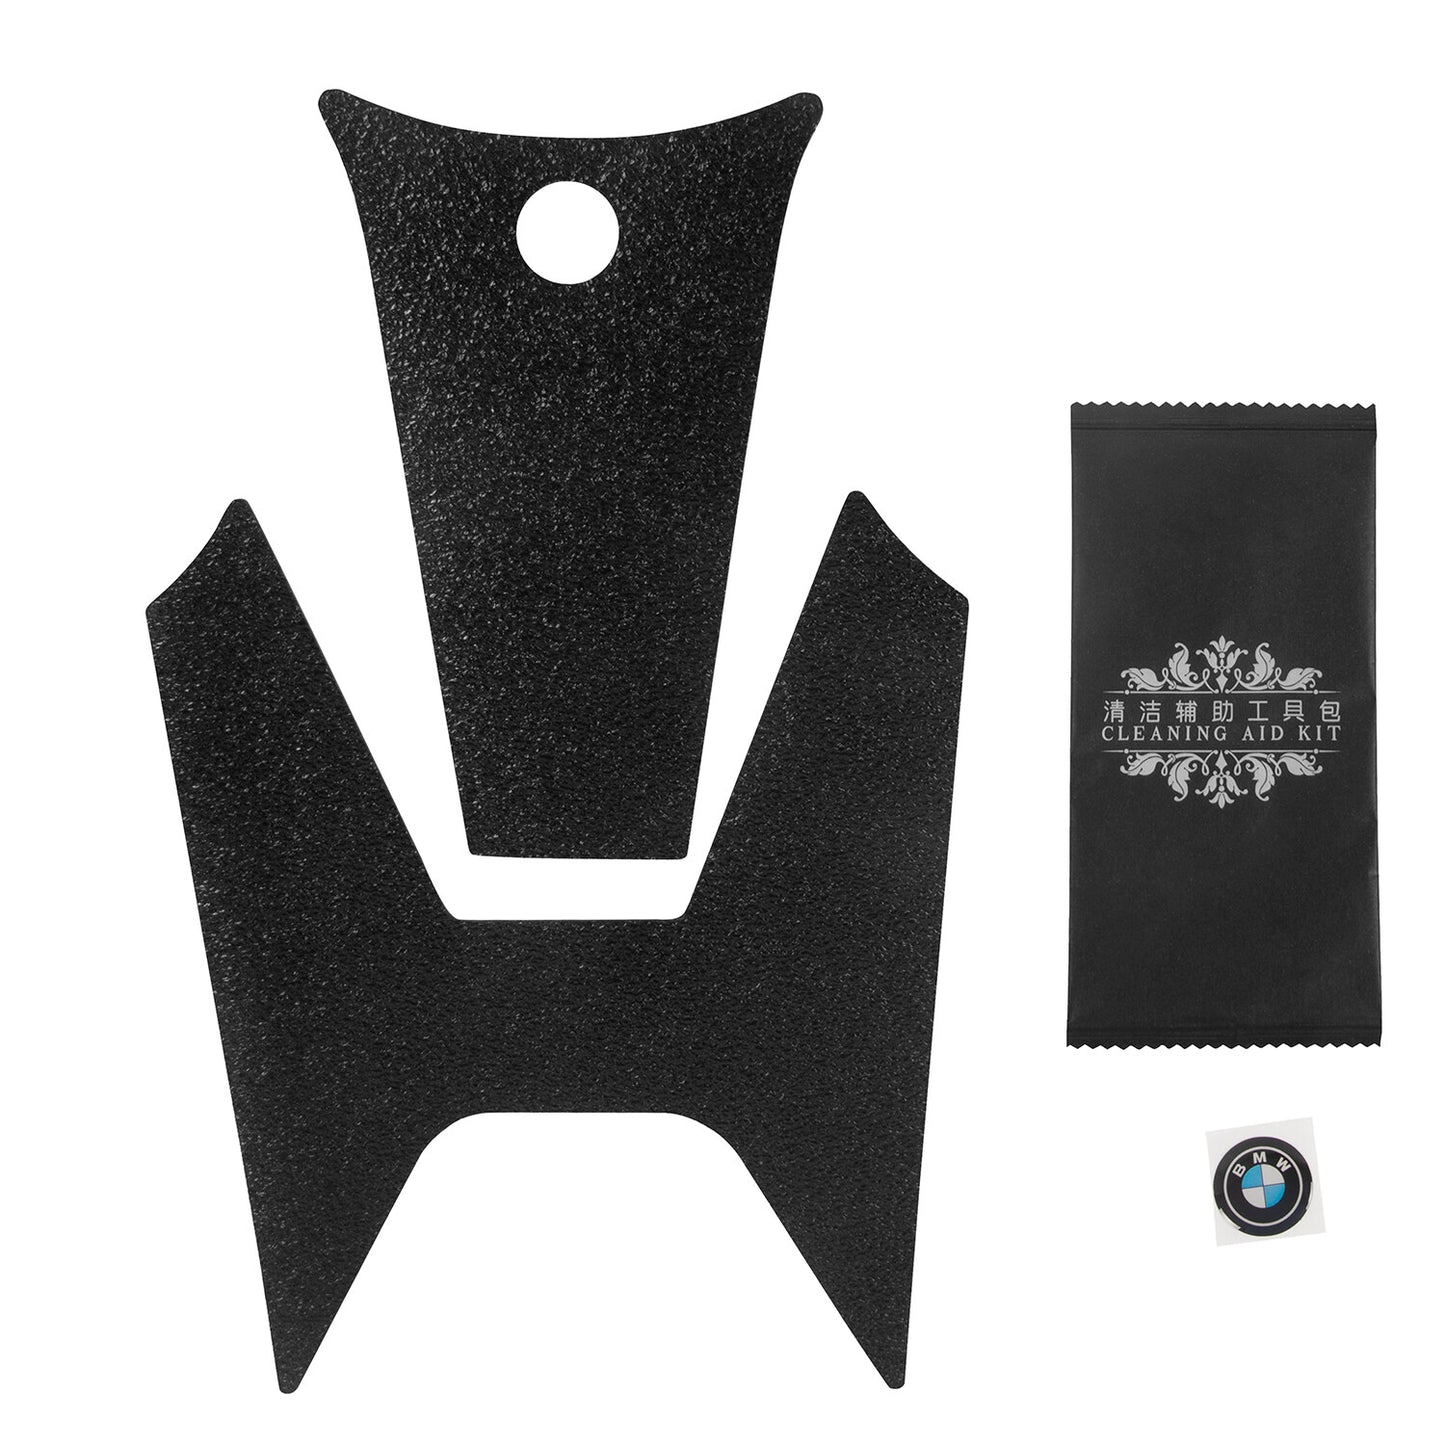 Wolfline Motorcycle Anti Slip Tank Pad Stickers Side Gas Tank Pad Knee Grip Decals Protection For BMW R1200GS R1250GS R1200 R1250 GS R 1200 1250 GS 2013 2014 2015 2016 2017 2018 2019 2020 2021 2022